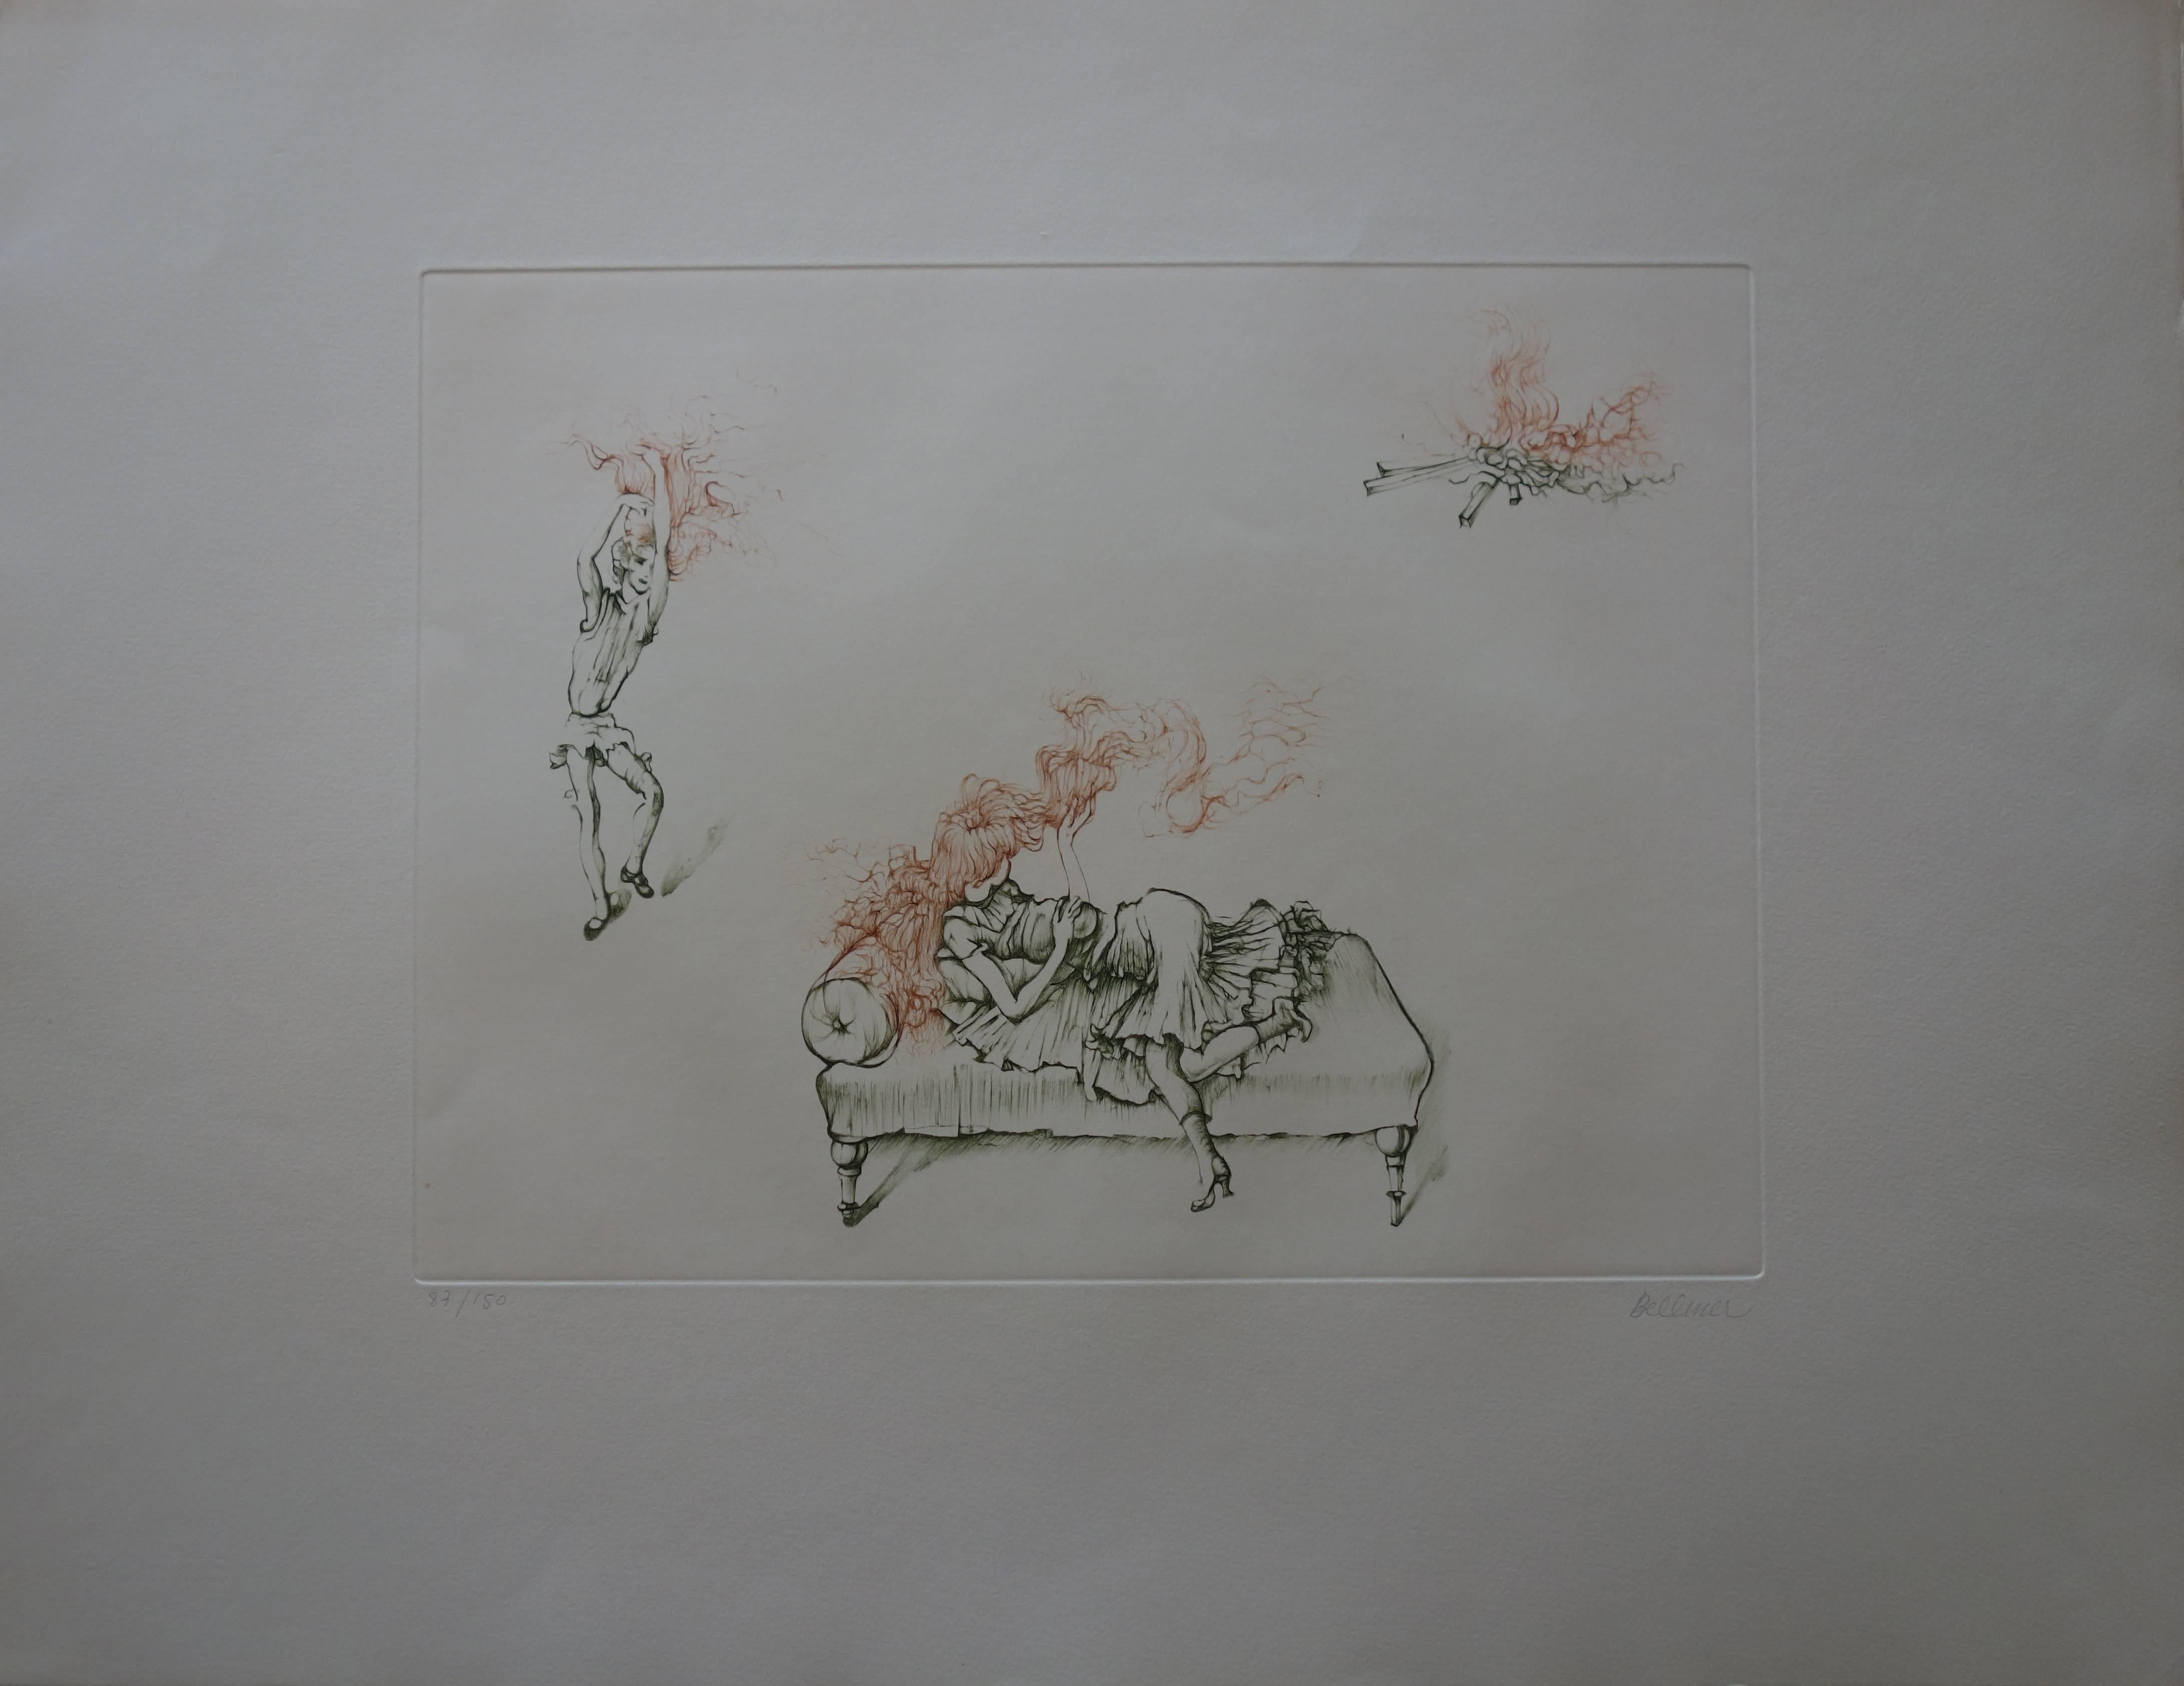 Red Hair Girl in Fire - Original handsigned etching - 150ex - Surrealist Print by Hans Bellmer